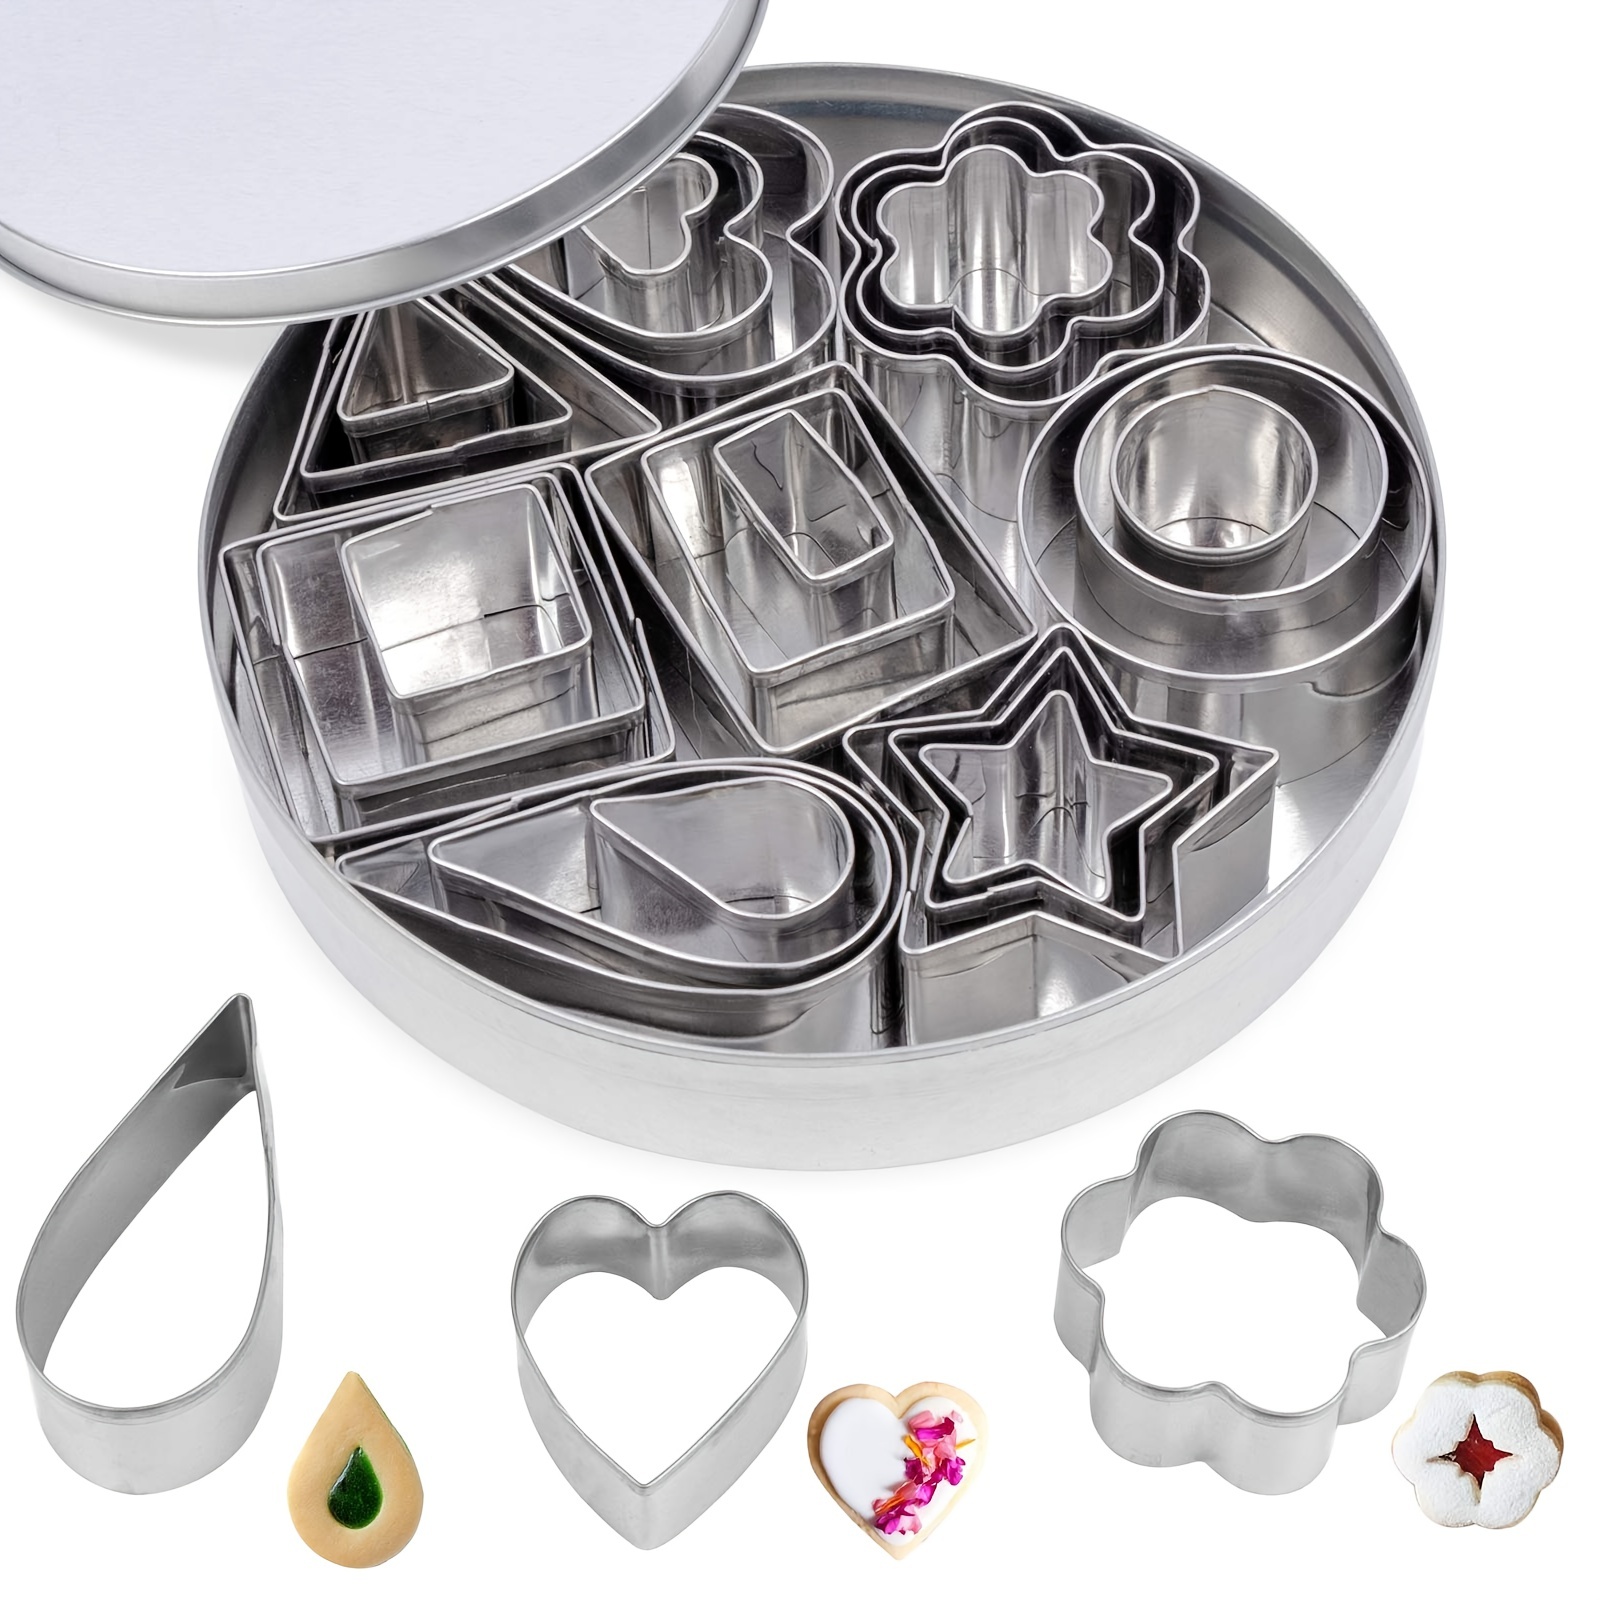 

24pcs, Geometric Cookie Cutters, Stainless Steel Pastry Cutter, Biscuit Molds, Baking Tools, Kitchen Accessories